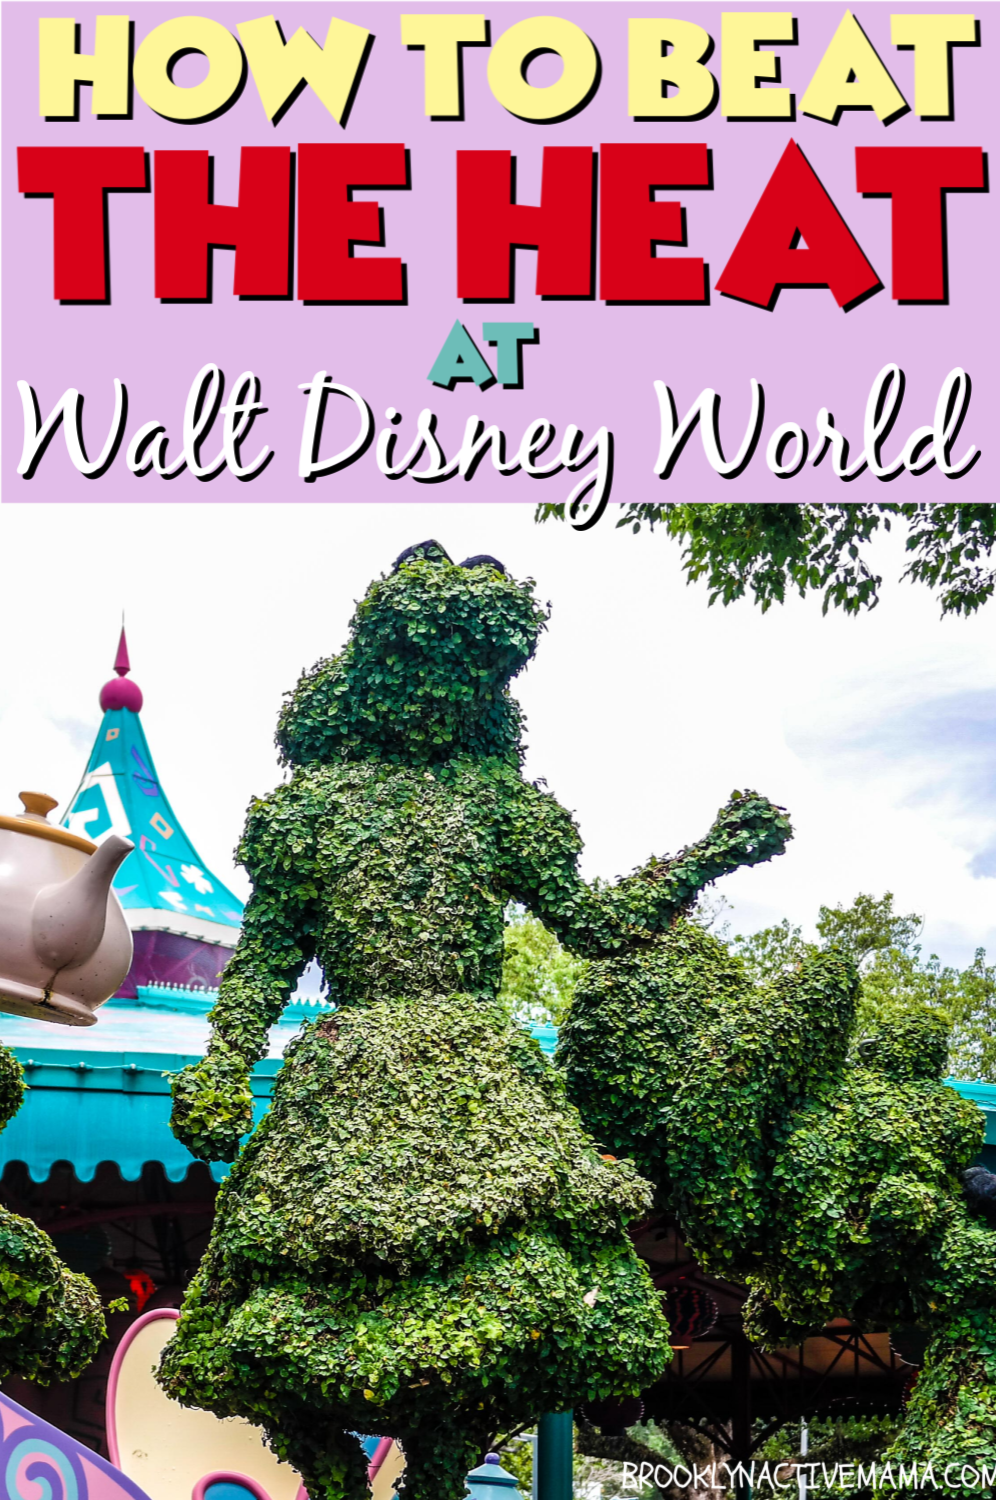 Walt Disney World summer heat does not have to make you miserable. Start your vacation off right with these must-have summer items. #disney #disneytips